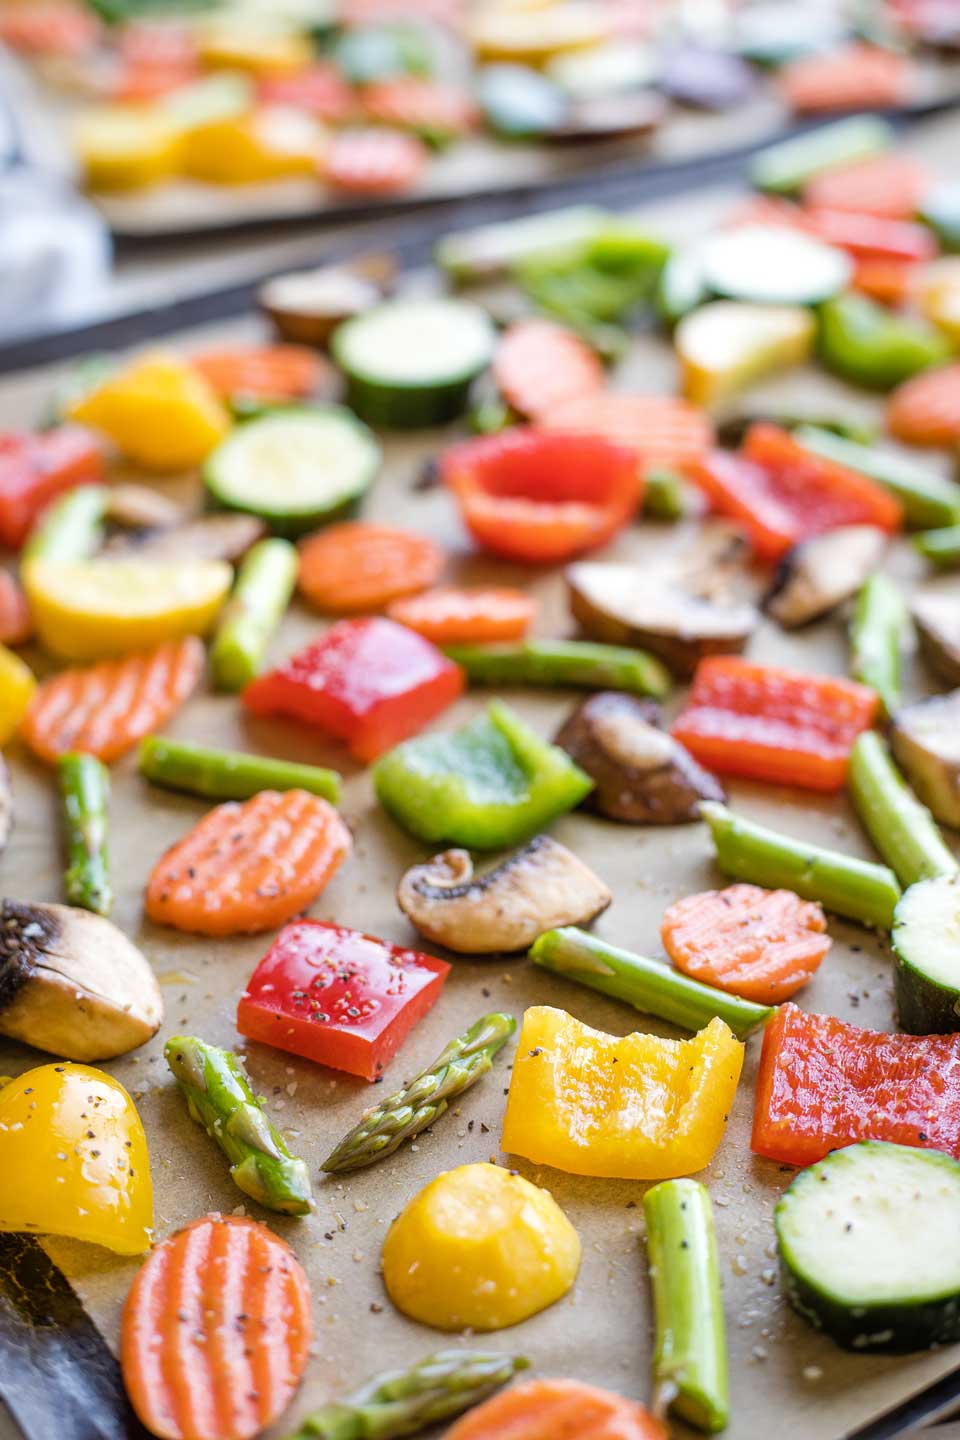 Raw vegetables coated in oil and seasonings, spread out on two sheet pans before being roasted.